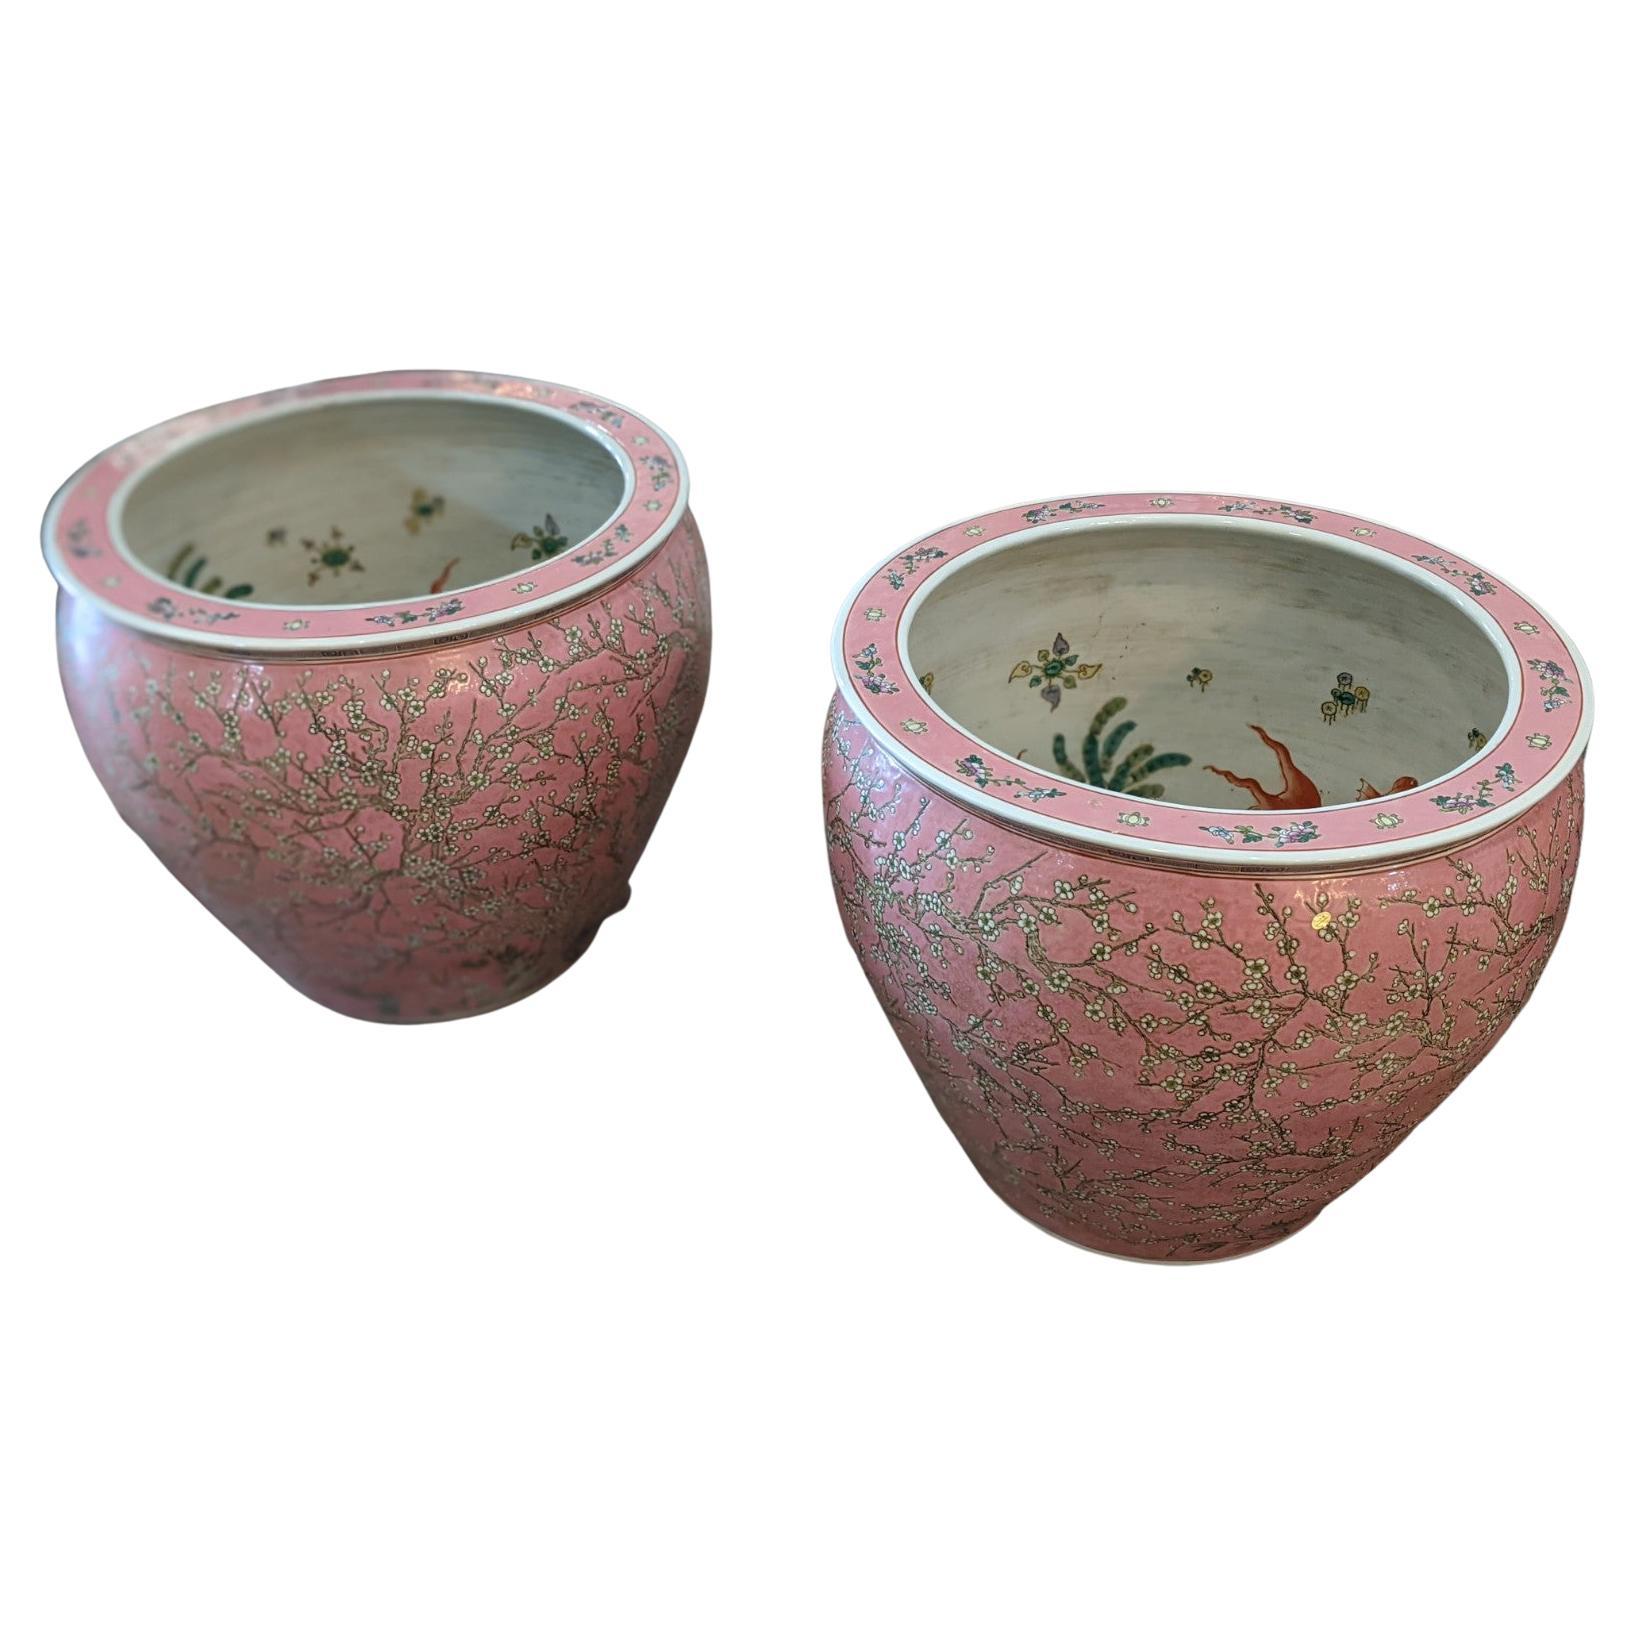 20th Century Porcelain Fish Bowls from China